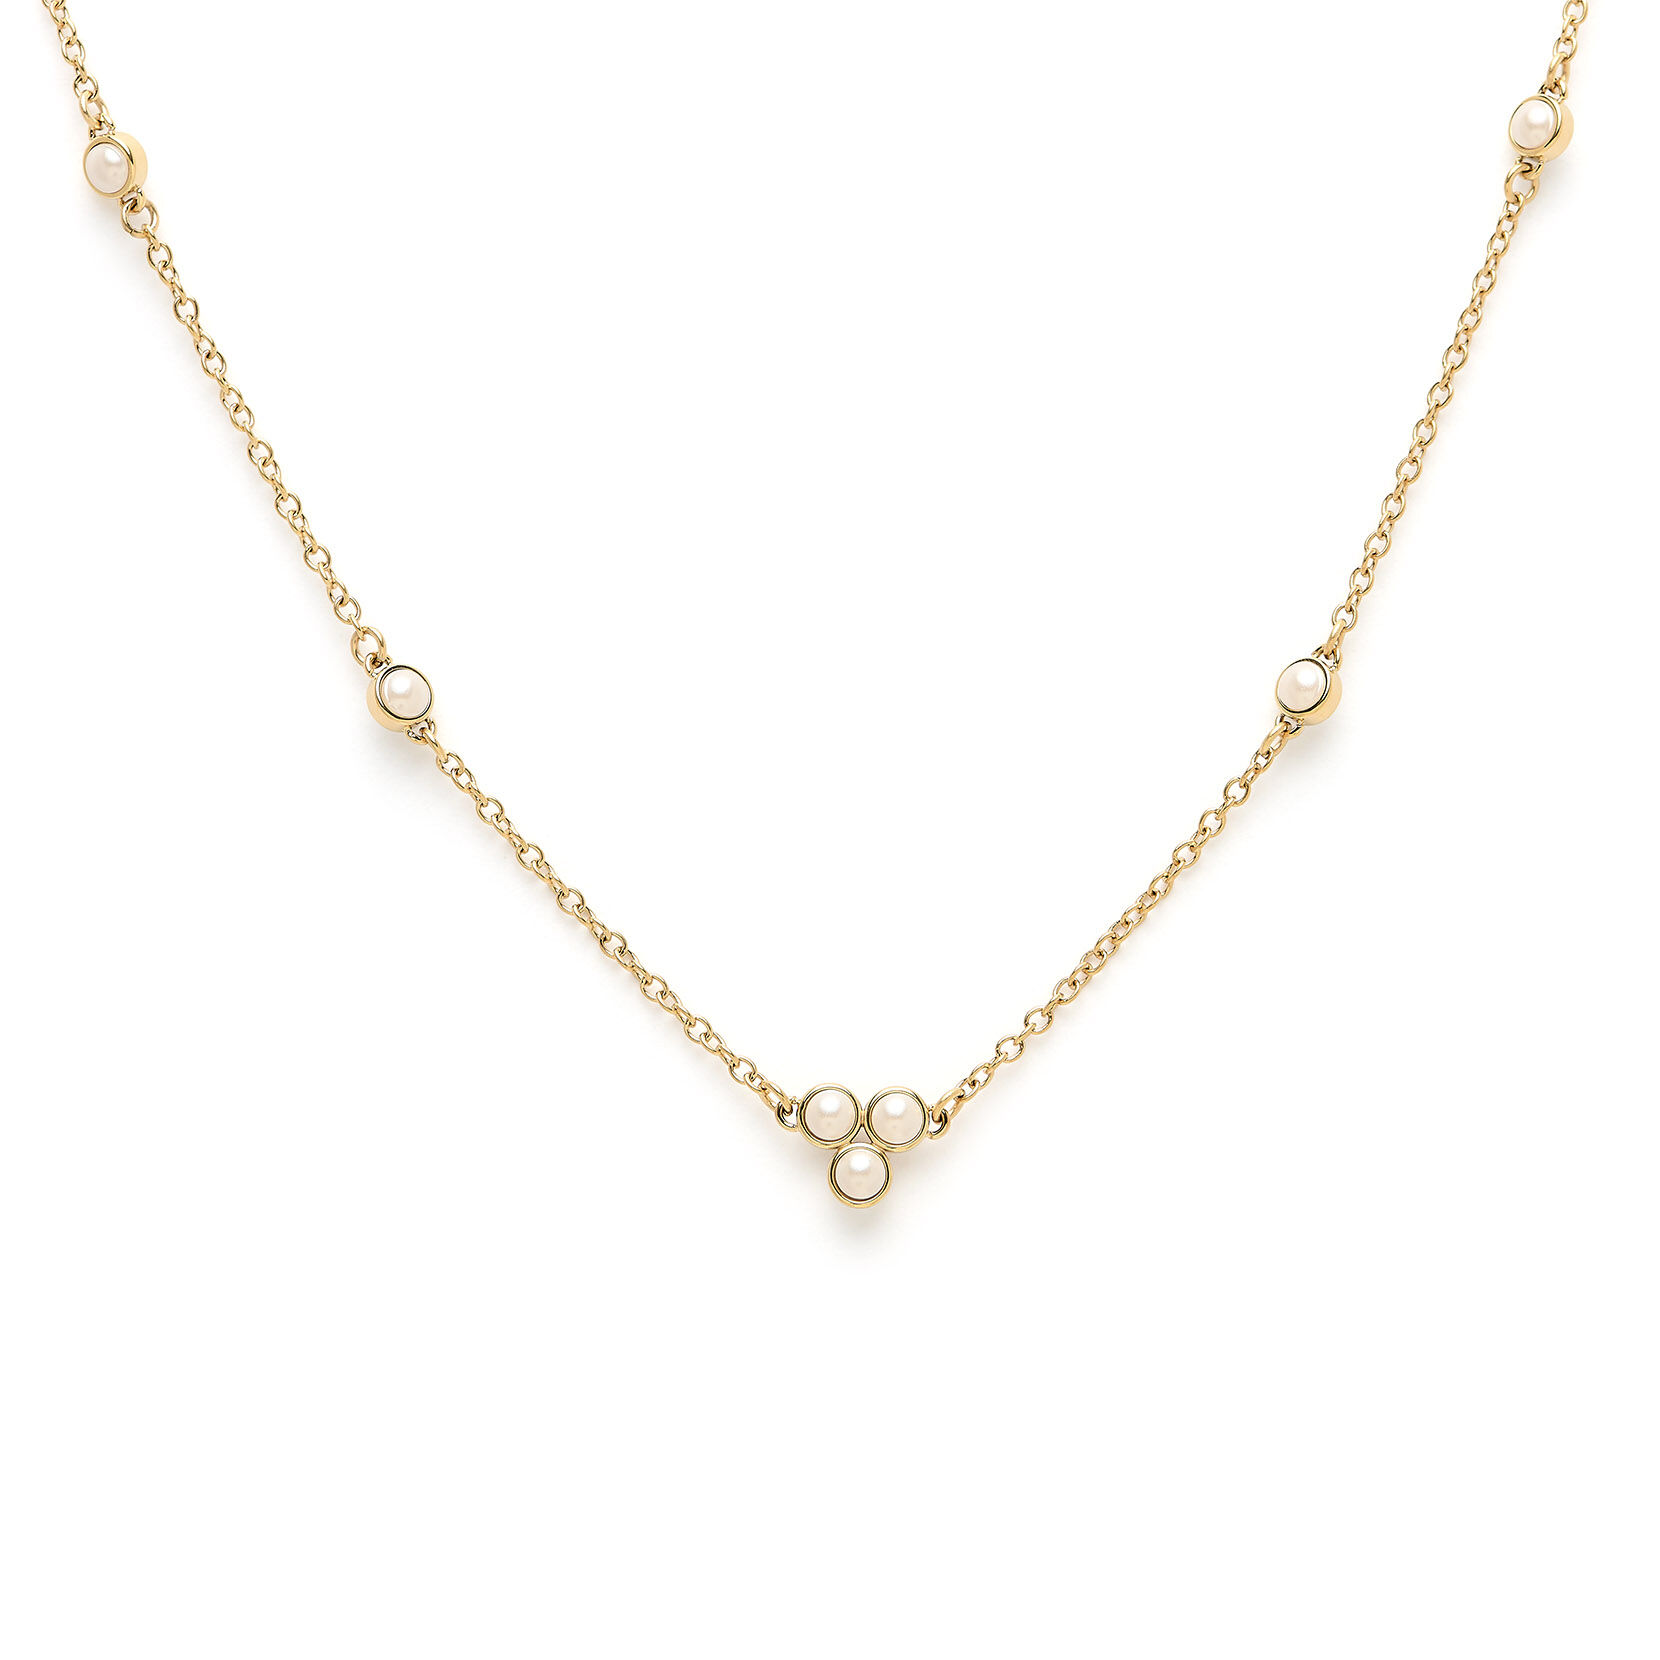 Olivia Burton London | 3D Bee and Ball Silver and Rose Gold Chain Bracelet  - Seven Season